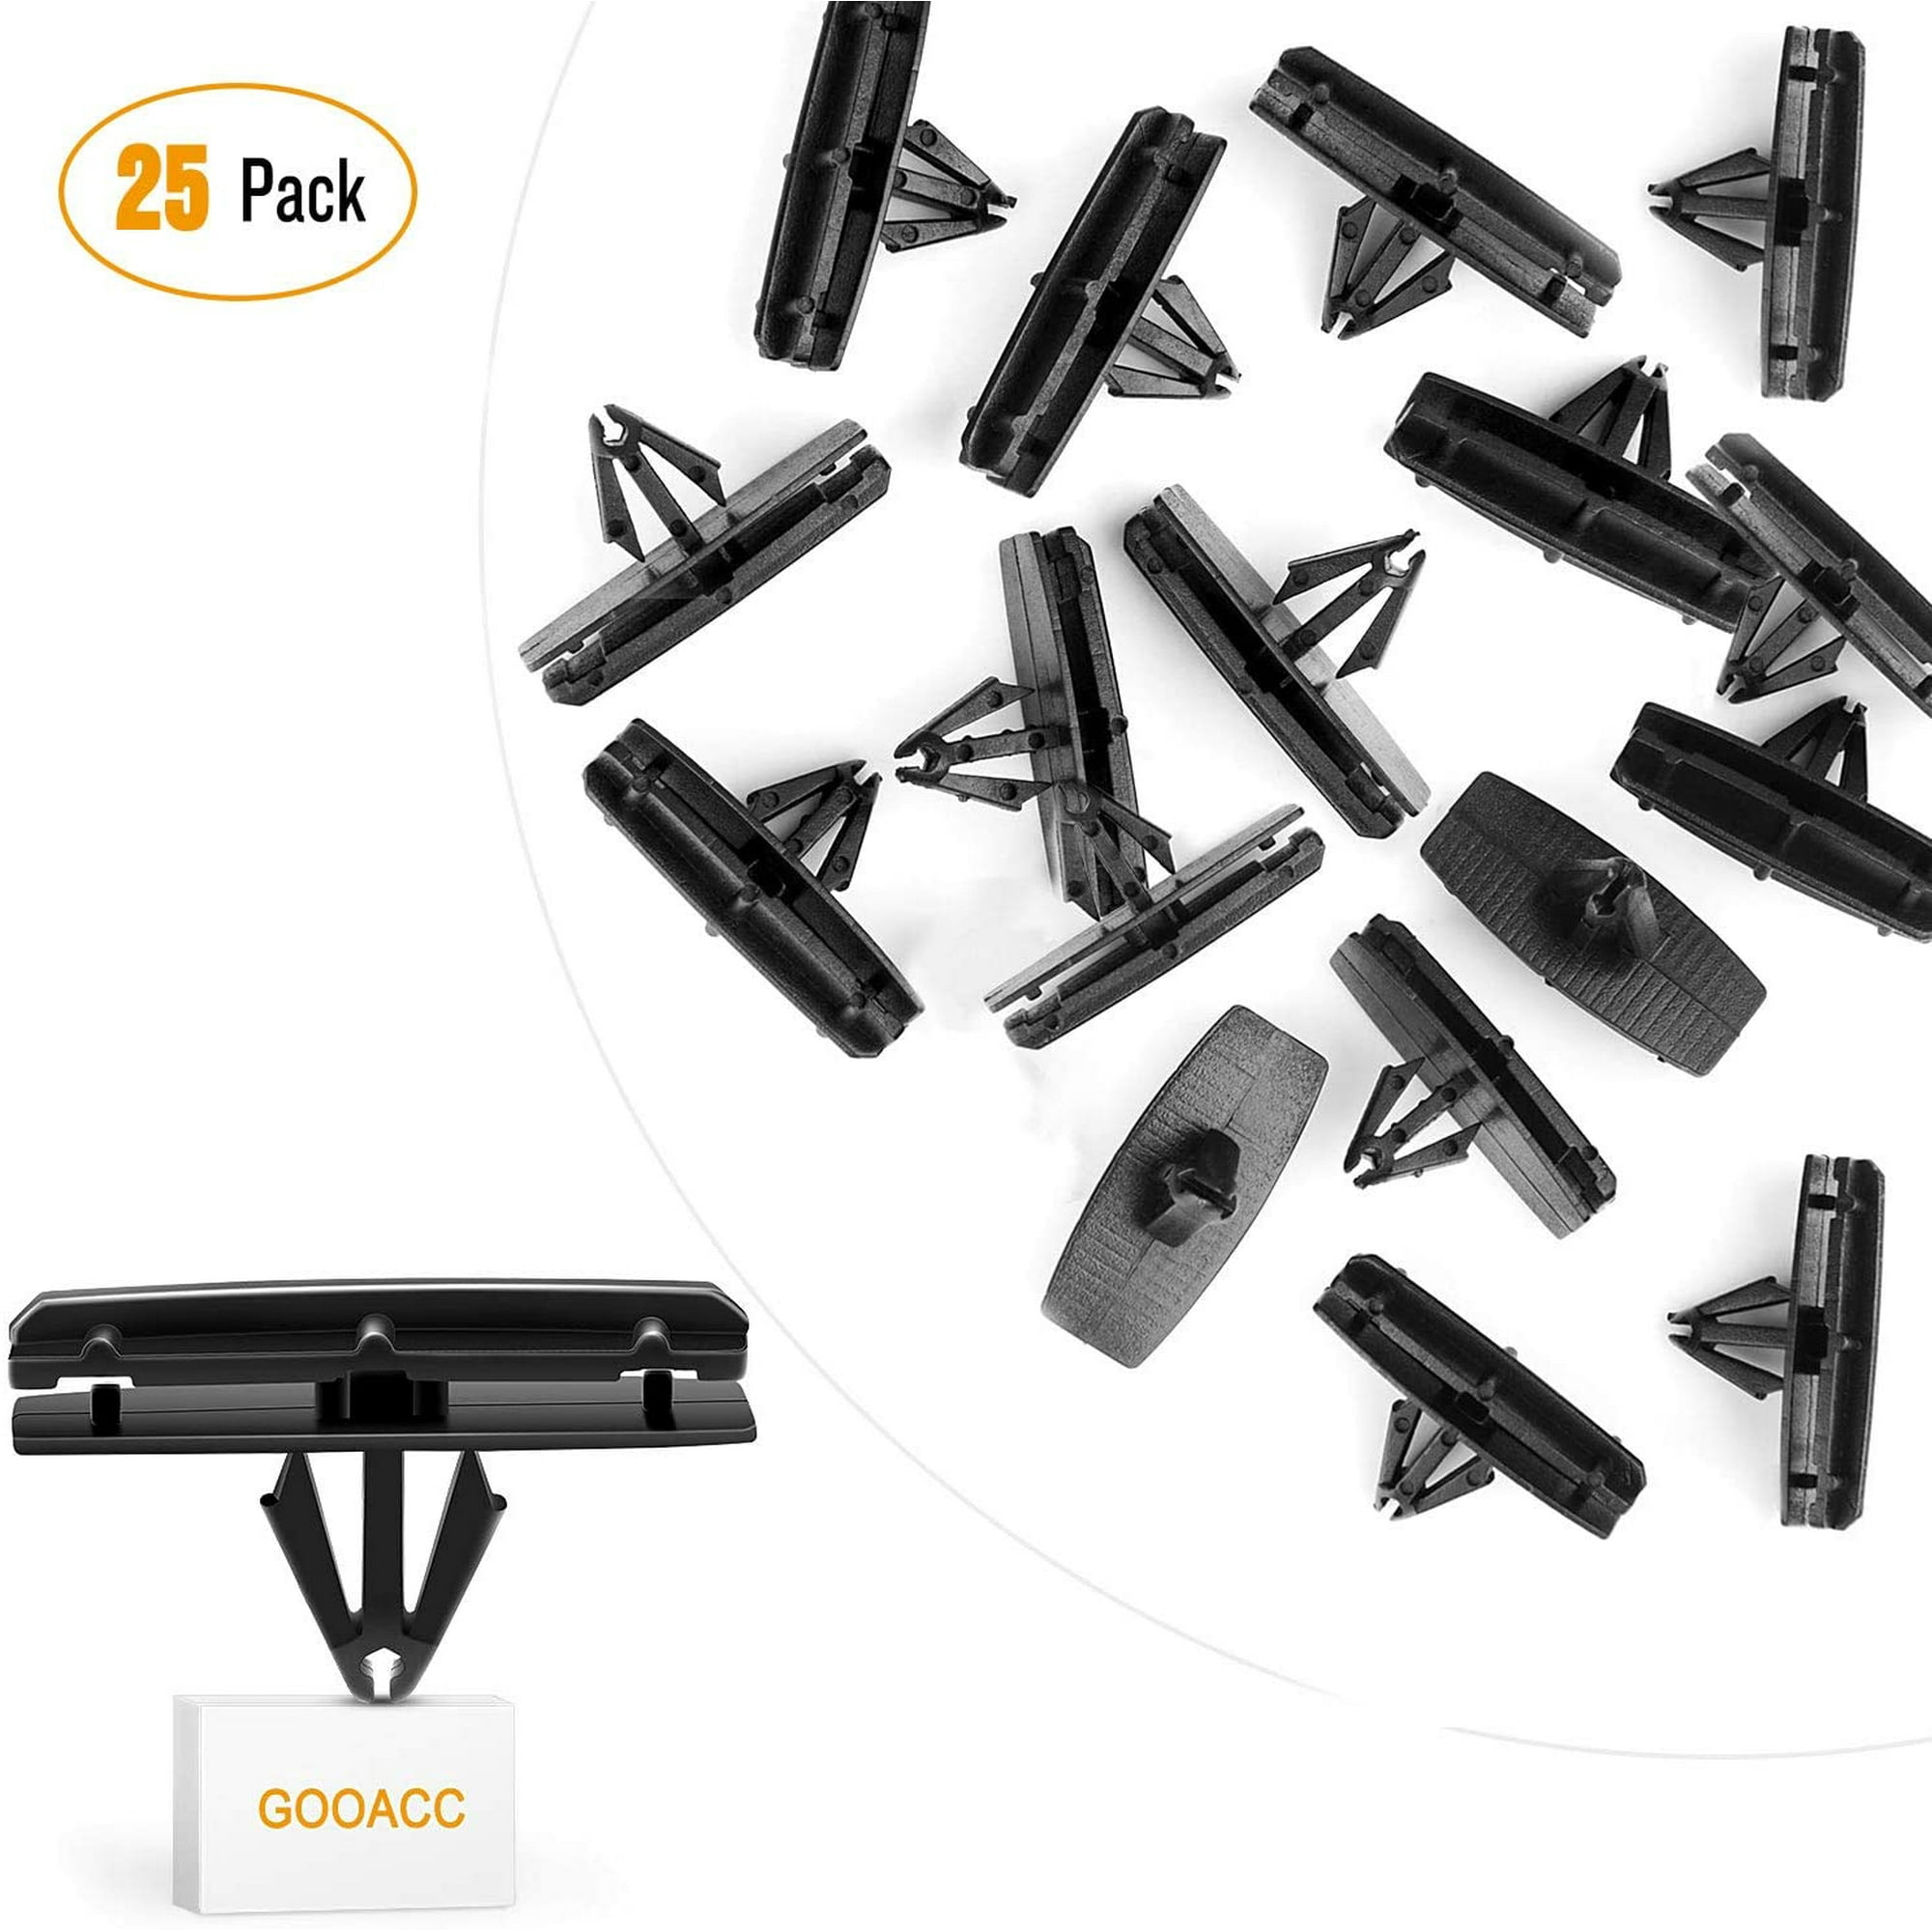 25PCS Fender Flare Moulding Clips Jeep Liberty Rocker for Chrysler  55157055-AA, 55157065-AA Jeep Wrangler Jeep Liberty - 25Pack | Walmart  Canada